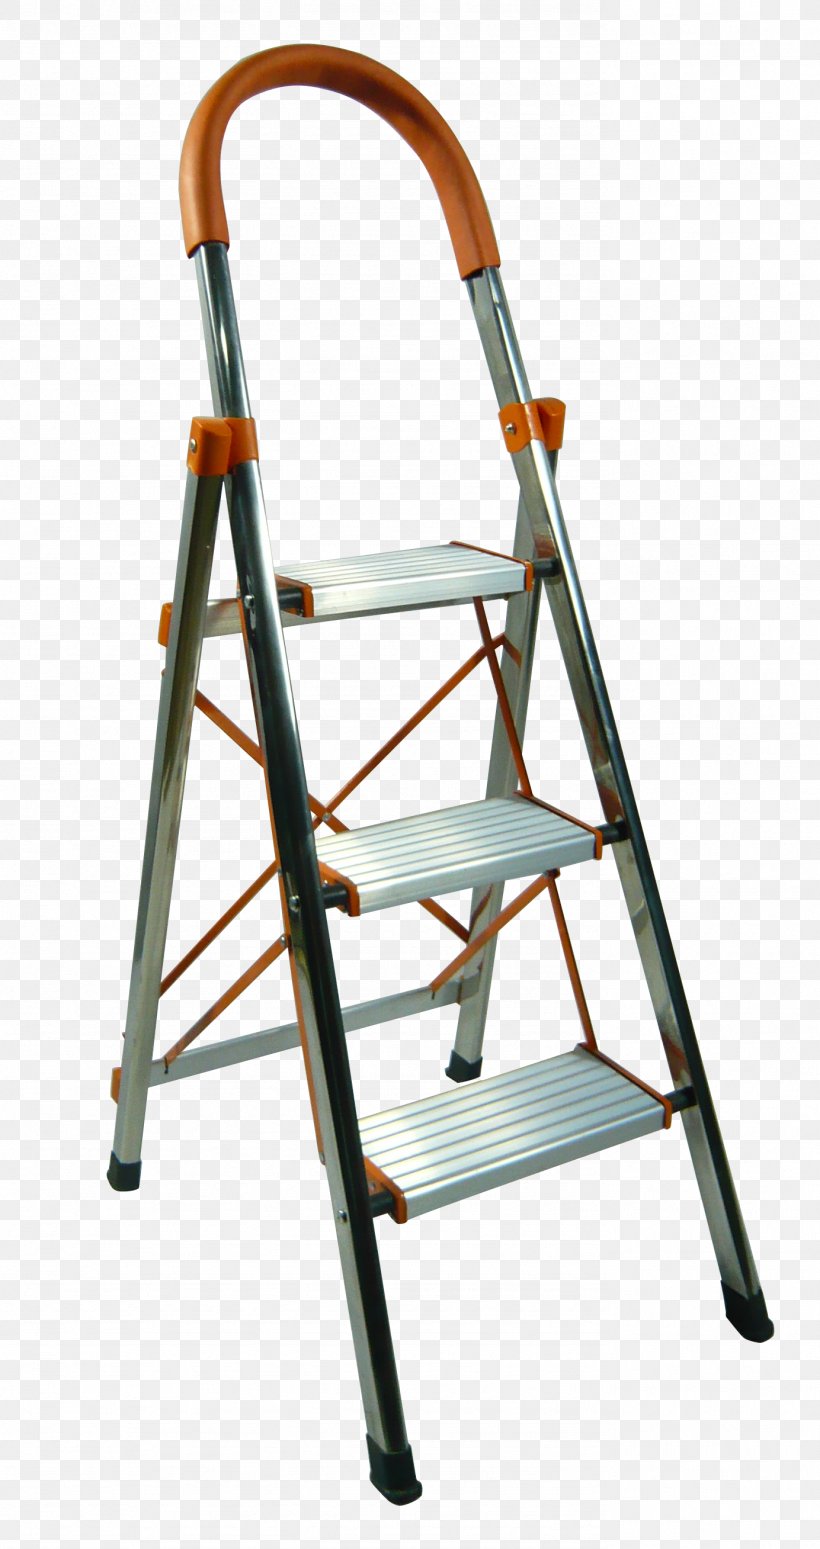 Ladder Stairs Aluminium Computer File, PNG, 1384x2616px, Ladder, Aluminium, Aluminium Alloy, Google Images, Gratis Download Free